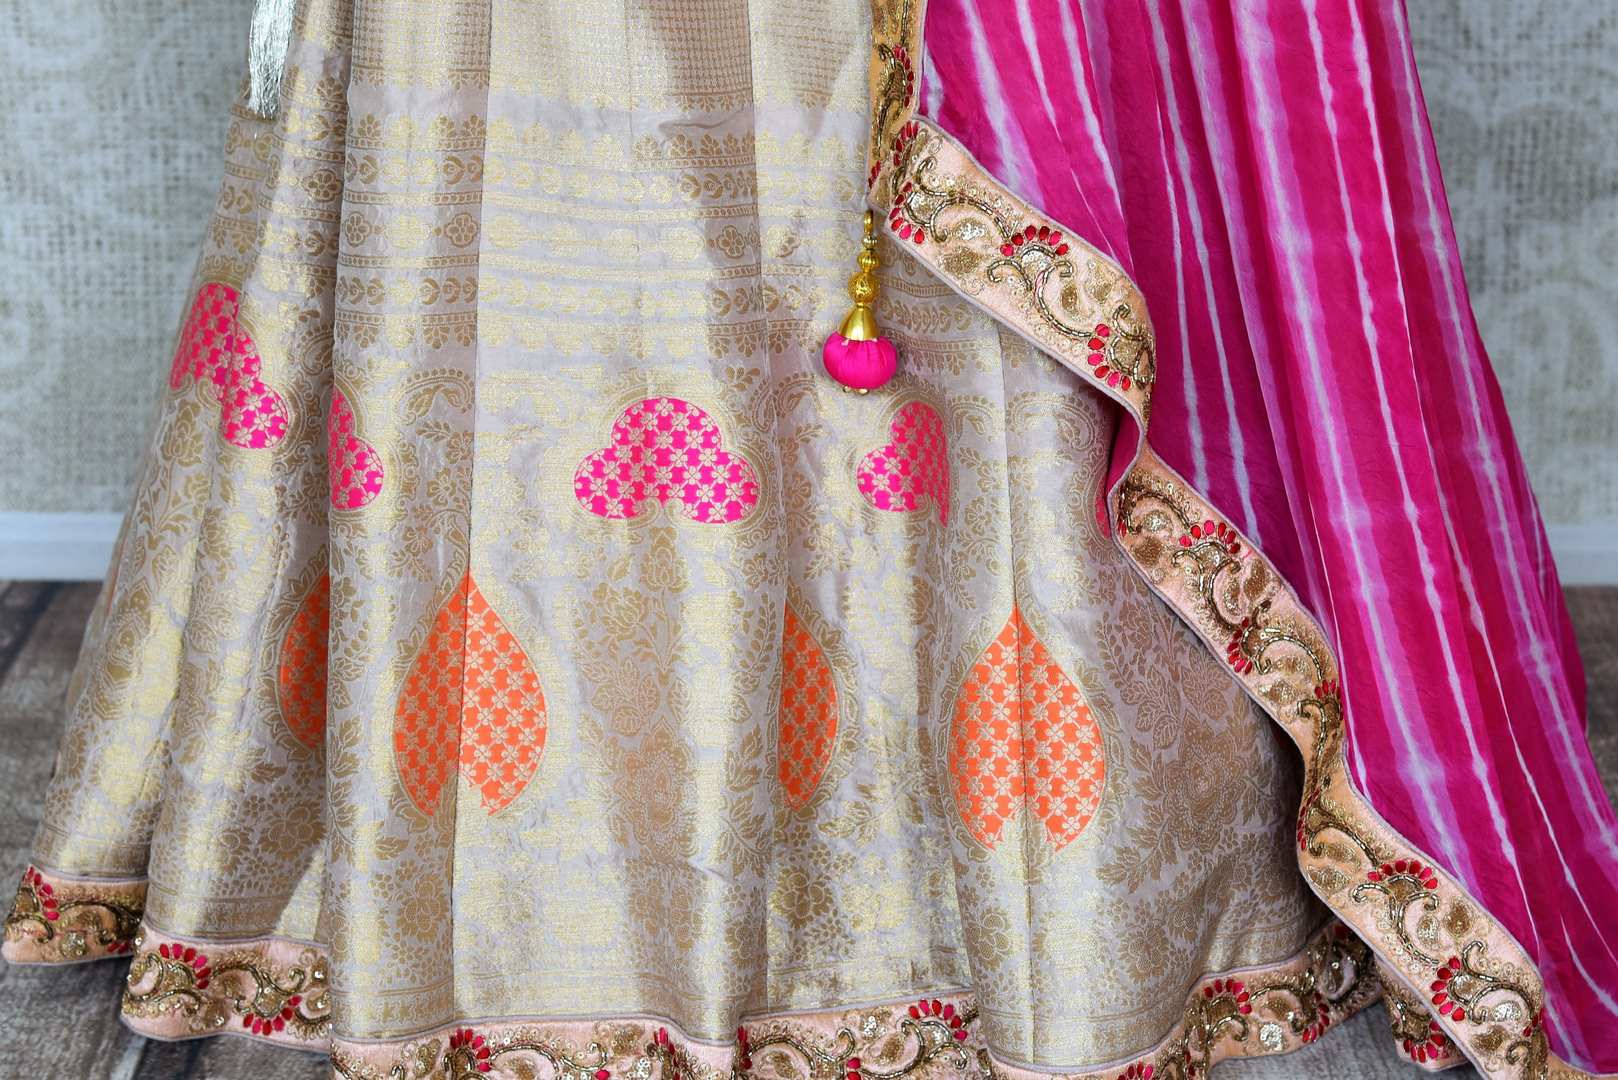 Shop off-white embroidered Banarasi lehenga online in USA with pink dupatta. Get ready to dazzle on weddings and special occasions with an exquisite variety of Indian designer clothes from Pure Elegance Indian clothing store in USA. We have a splendid collection of bridal lehengas, designer sarees, Anarkali suits to make your look absolutely one of kind.-bottom